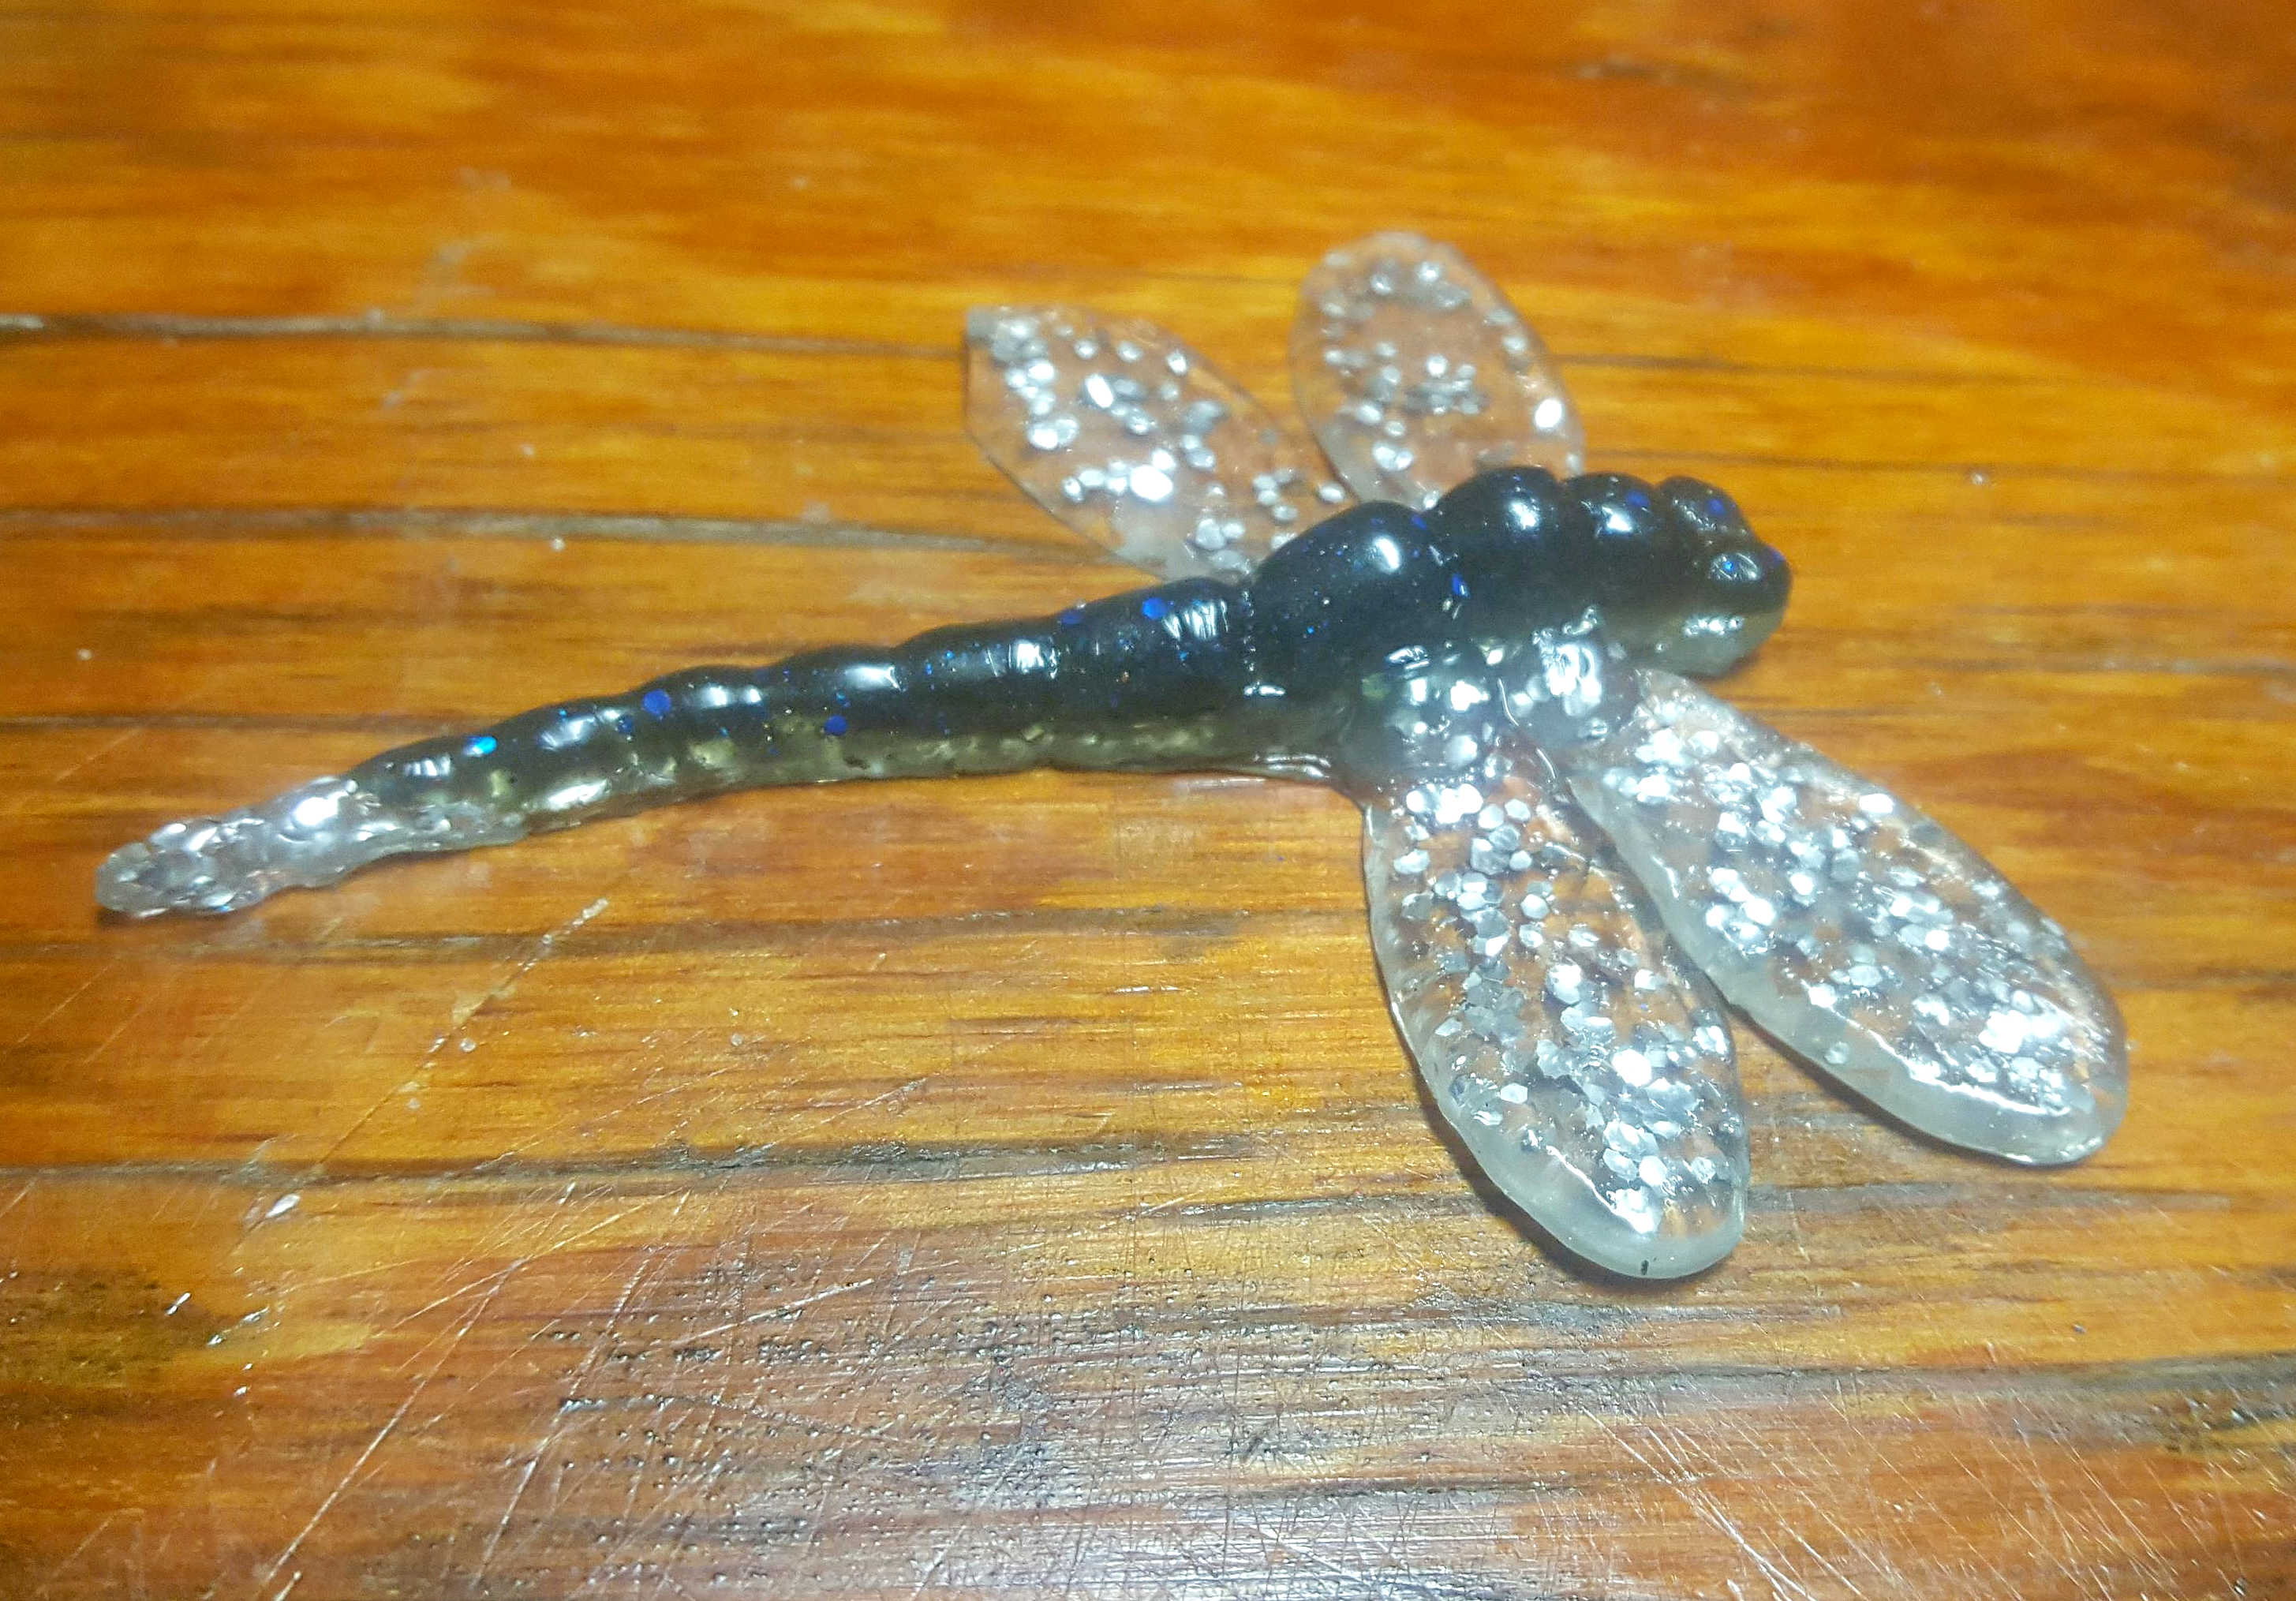 I can't find a Dragonfly topwater lure! - Tacklemaking - Bass Fishing Forums